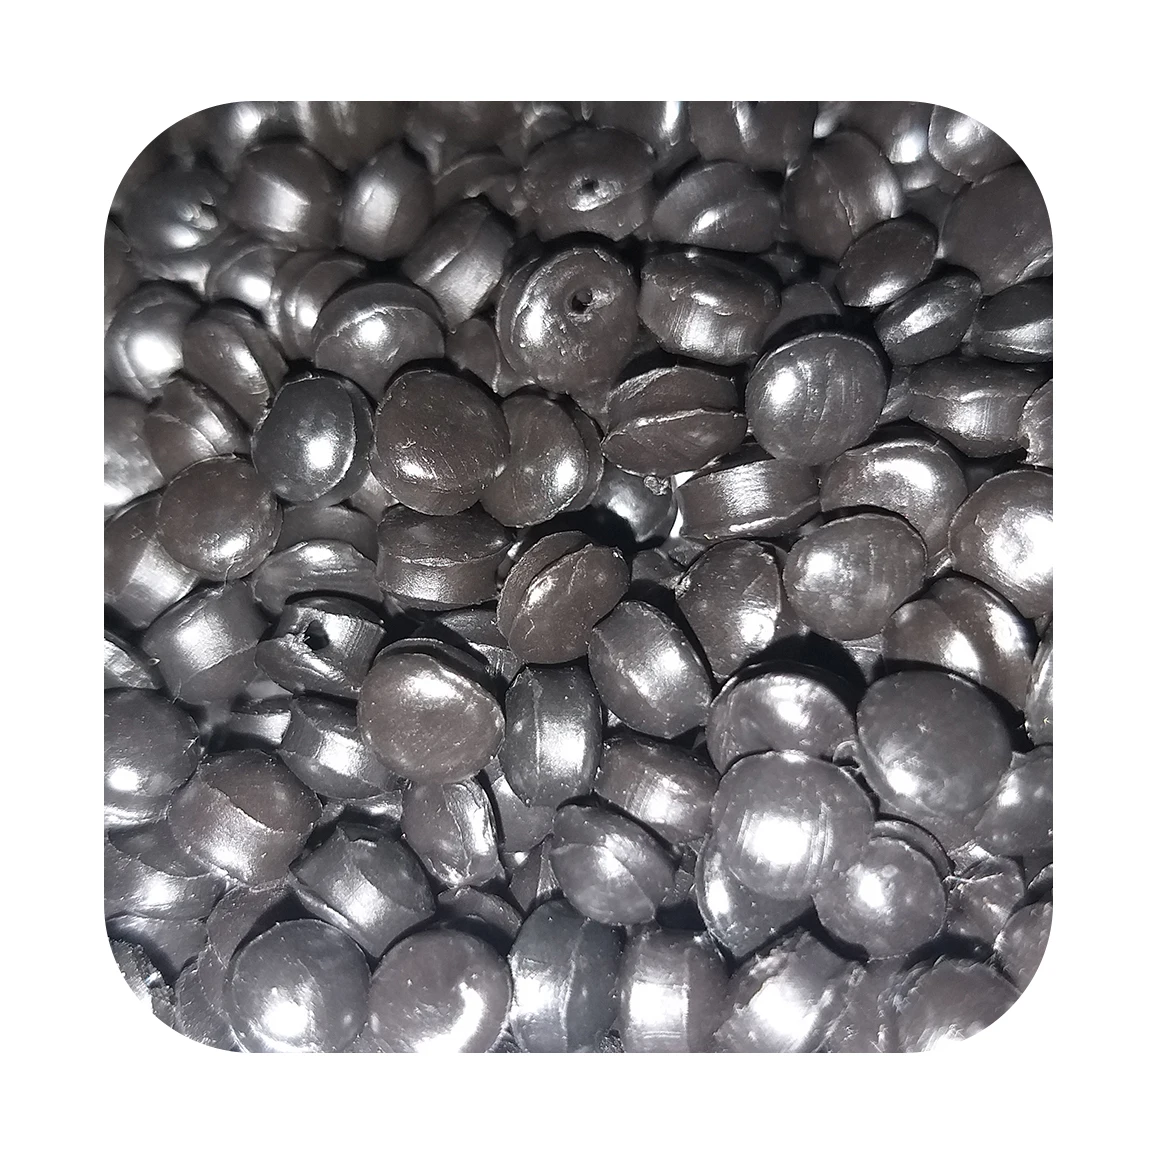 Recycled Granulated Plastic Polymer Polypropylene (ص), Round Shape, Industrial/Business Usage, Lowest Prices on The Market